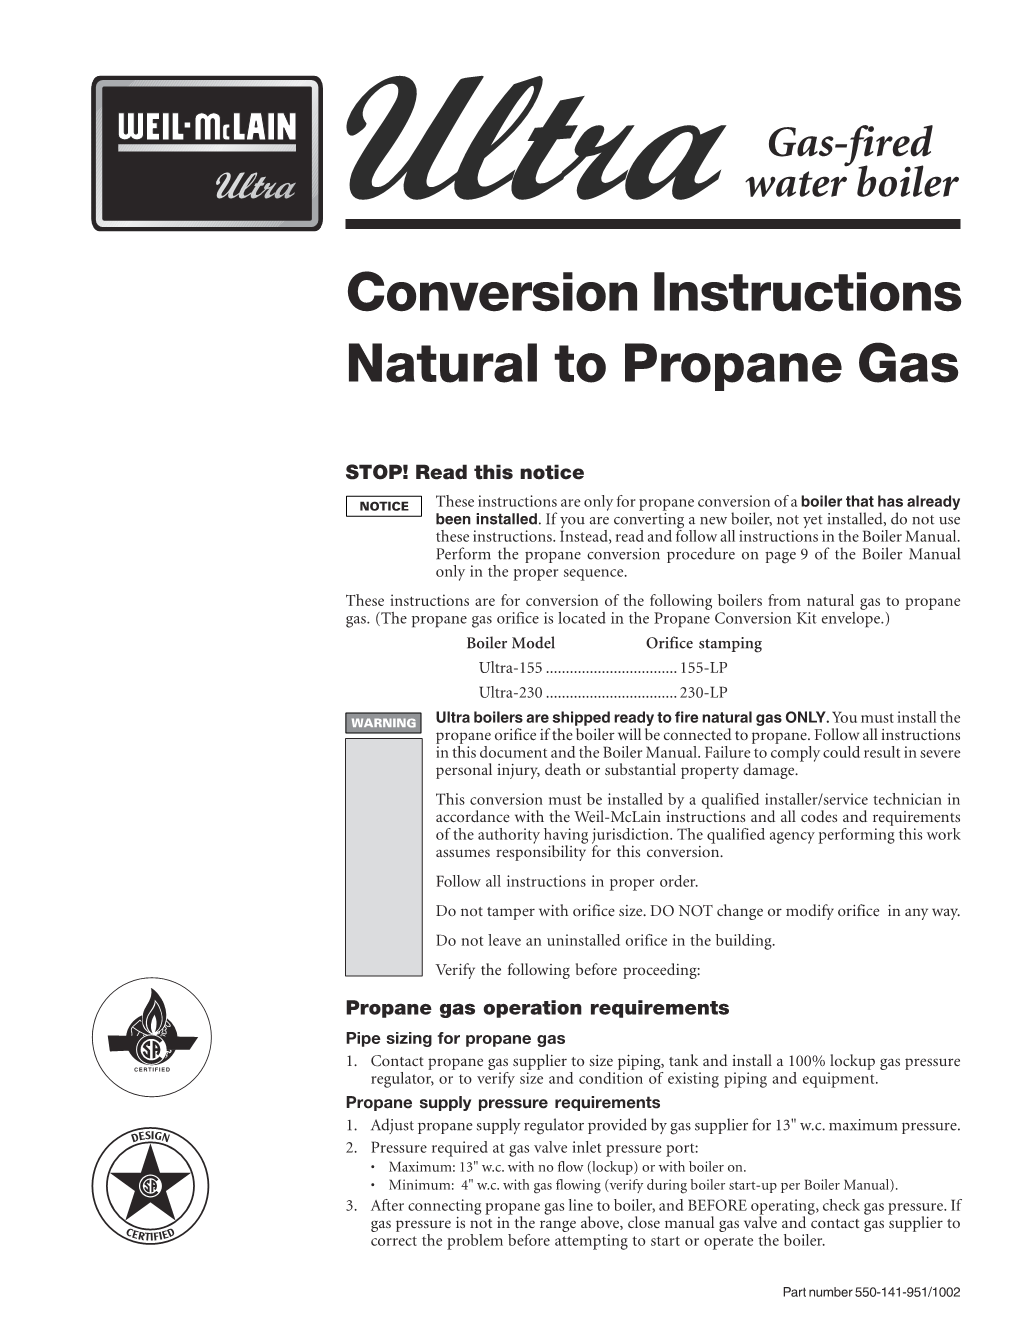 Conversion Instructions Natural to Propane Gas